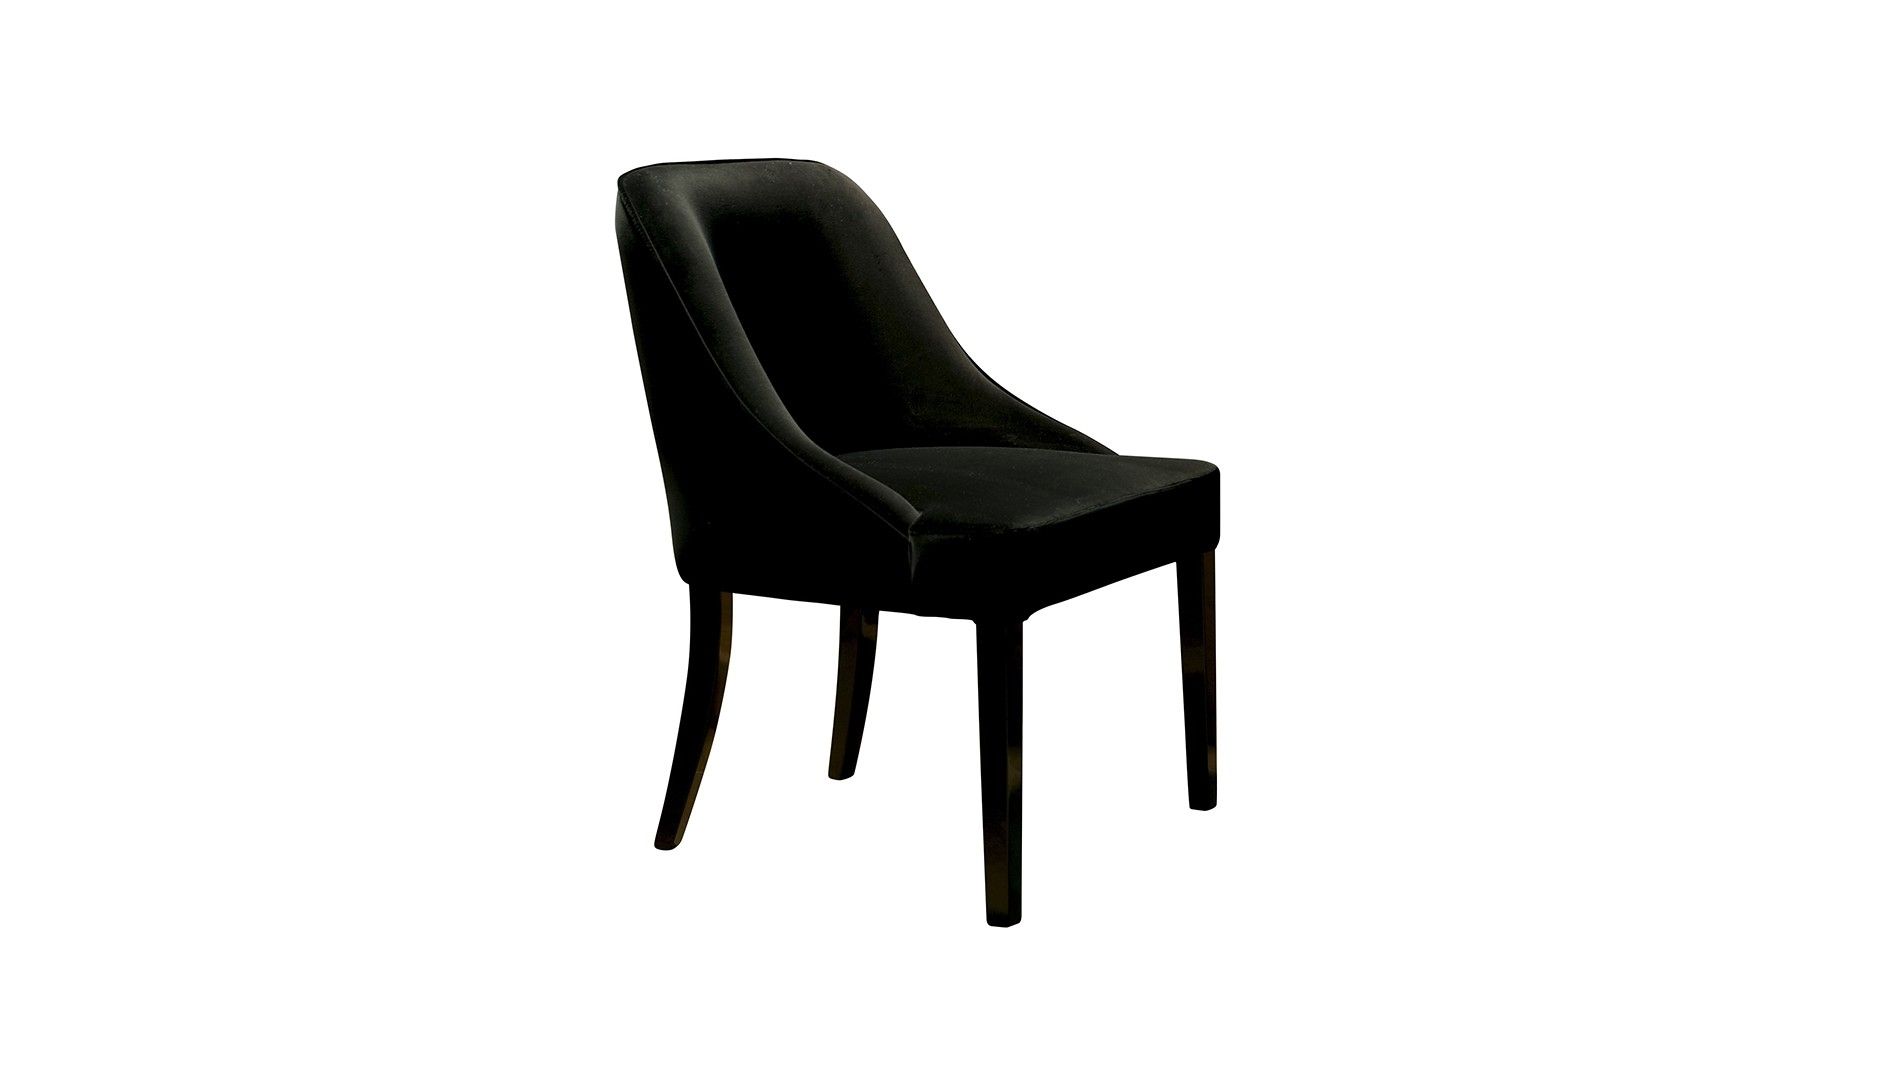 Dom Side Chairs Pertaining To 2019 Dom Edizioni, Vicky Dining Chair, Buy Online At Luxdeco (View 3 of 20)